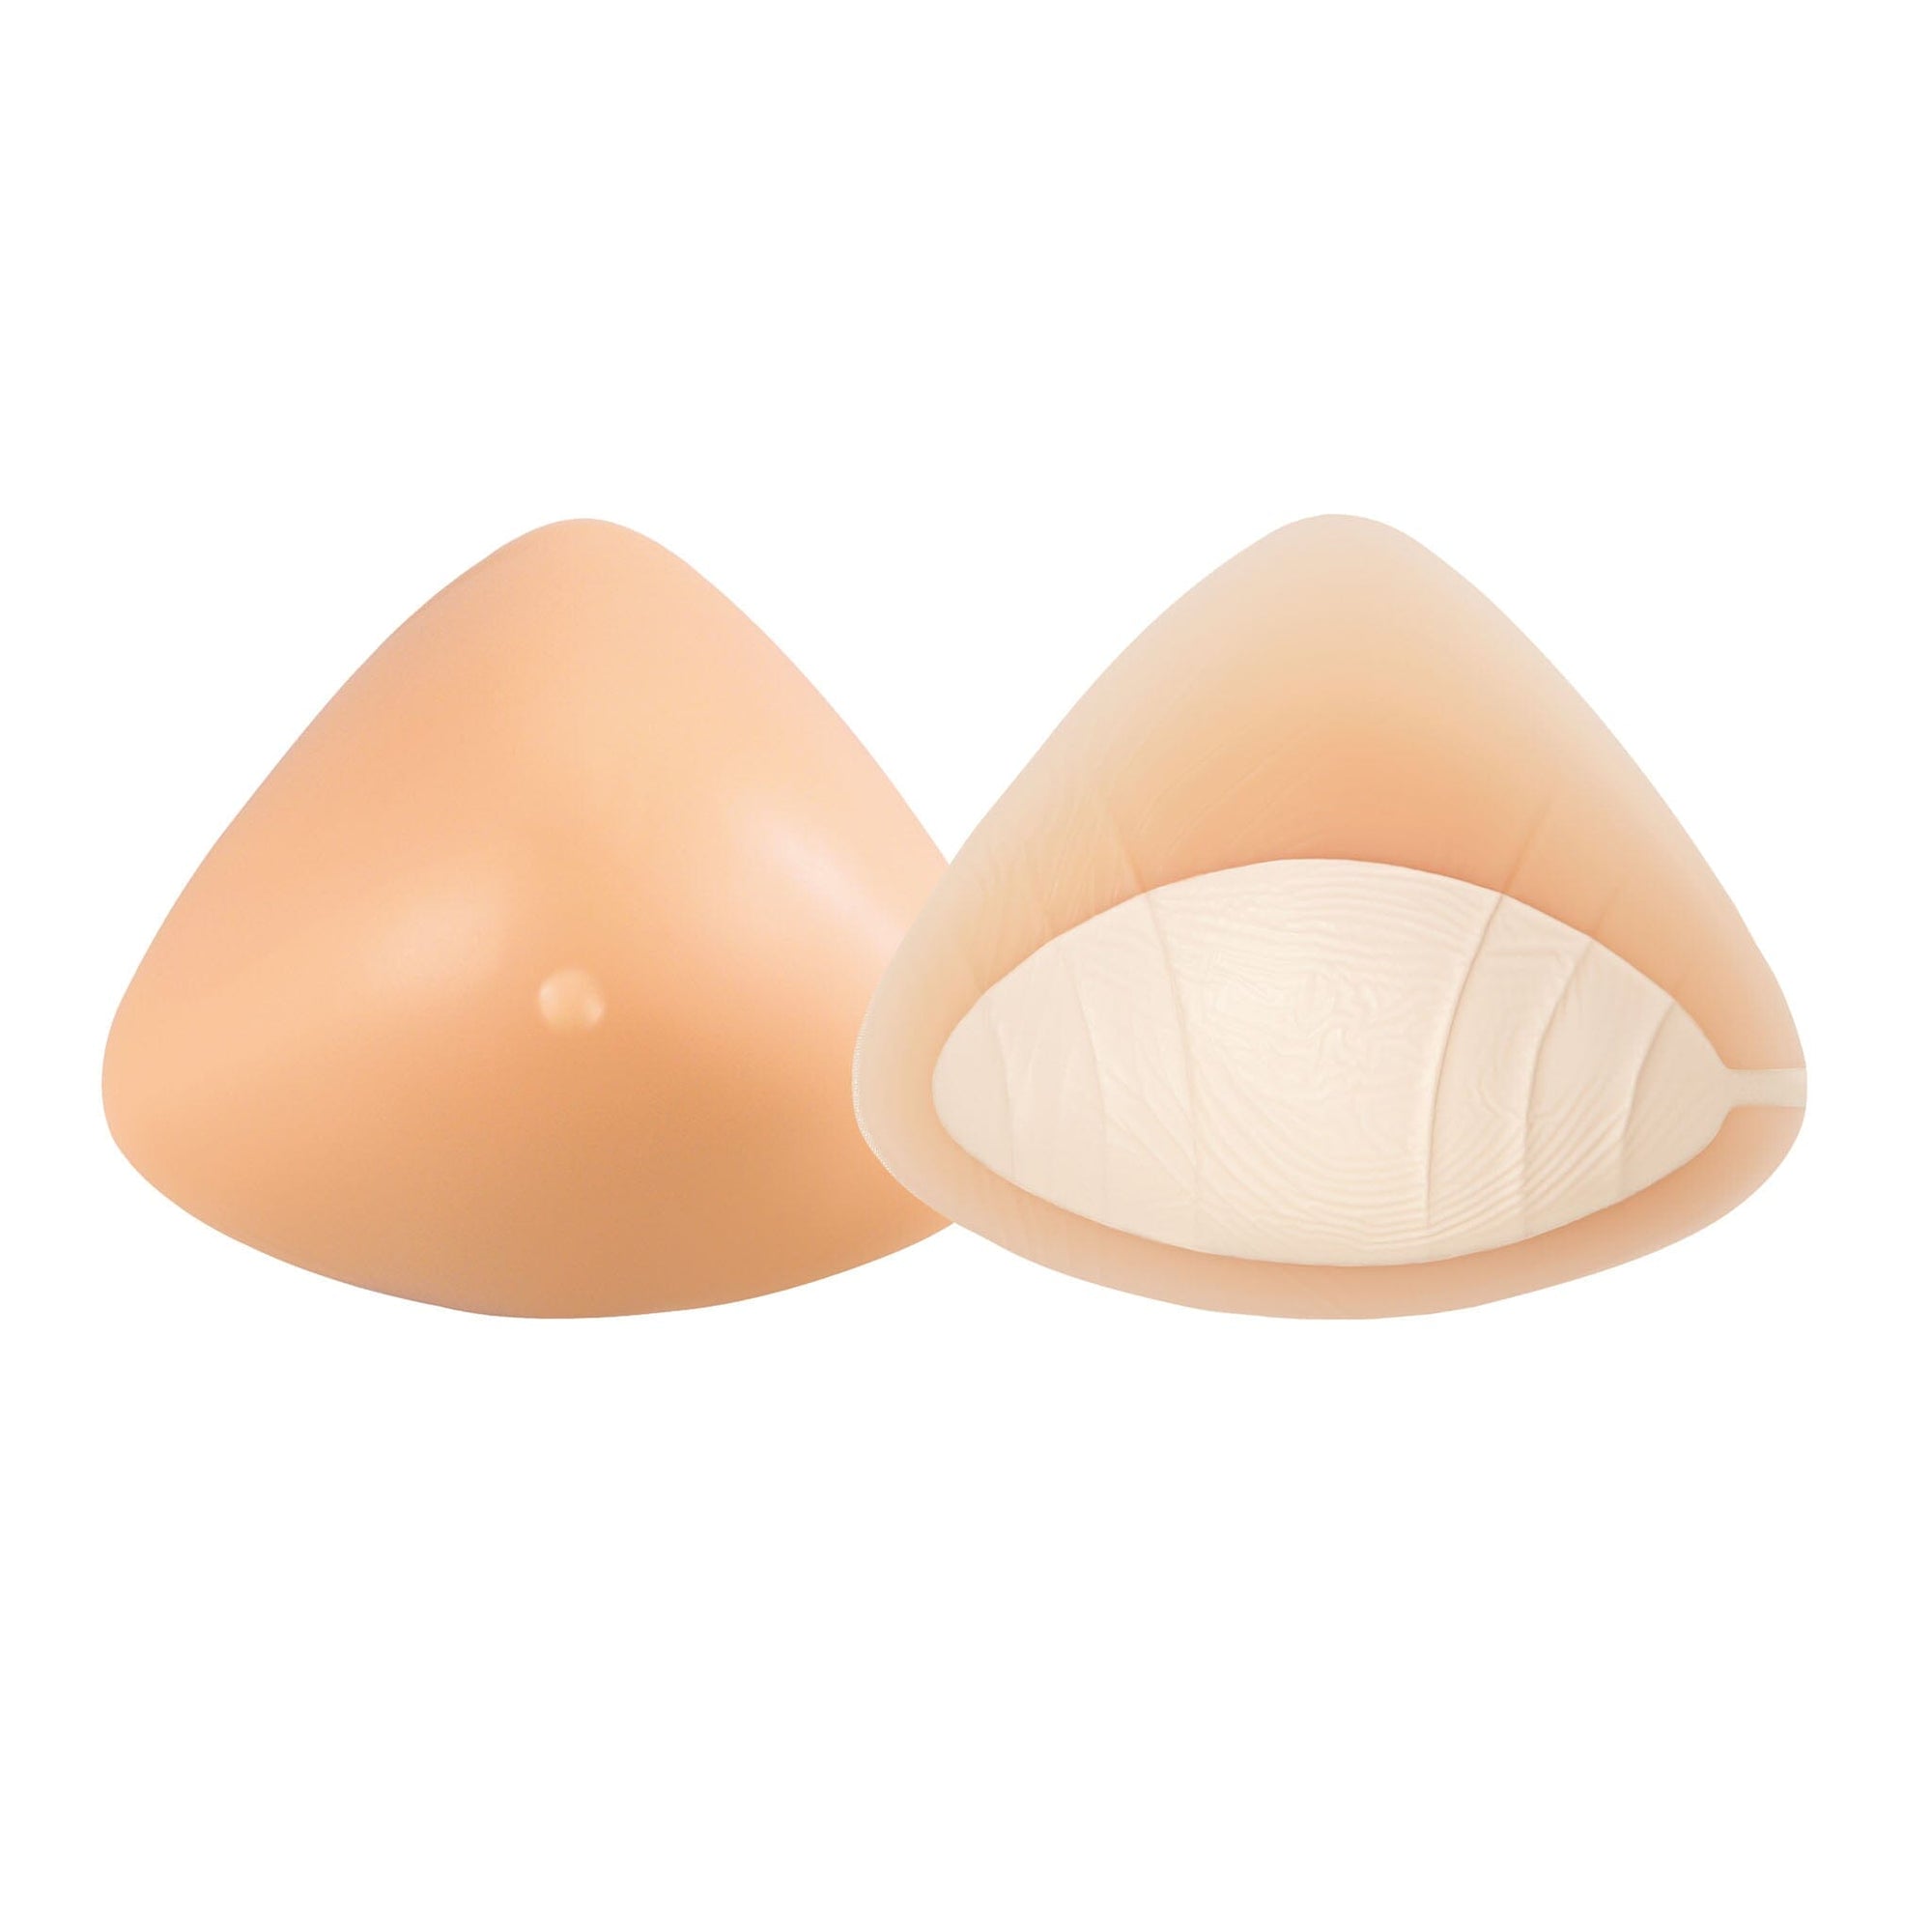 Triangular shaped partial providing additional fullness and a smooth shape across the whole breast.